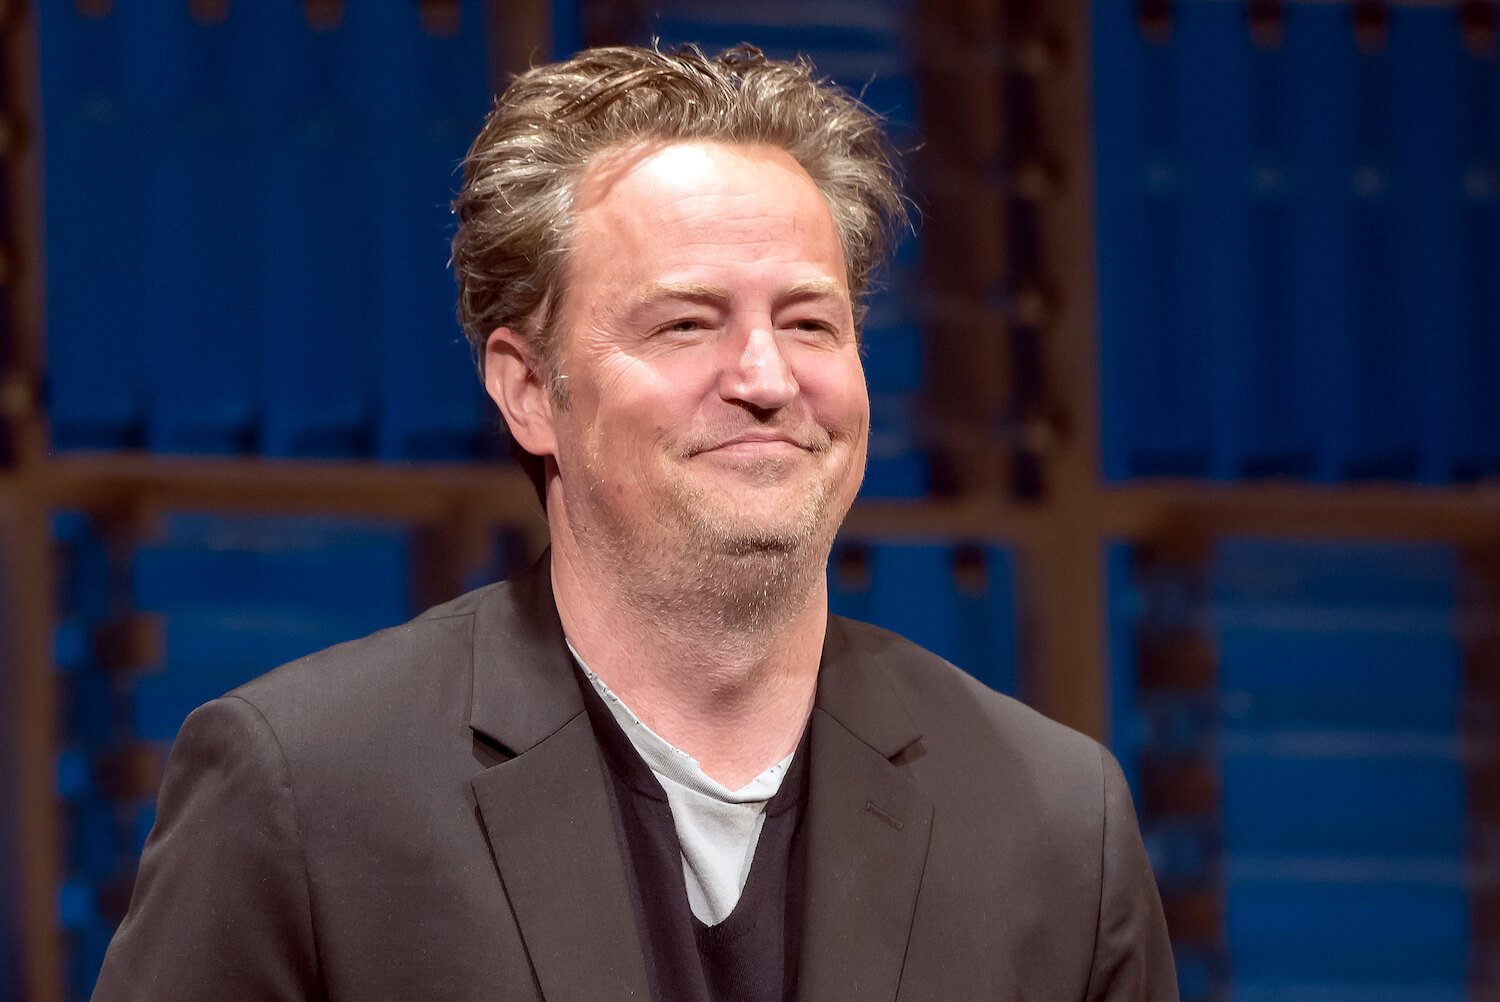 'Friends' actor Matthew Perry smiling